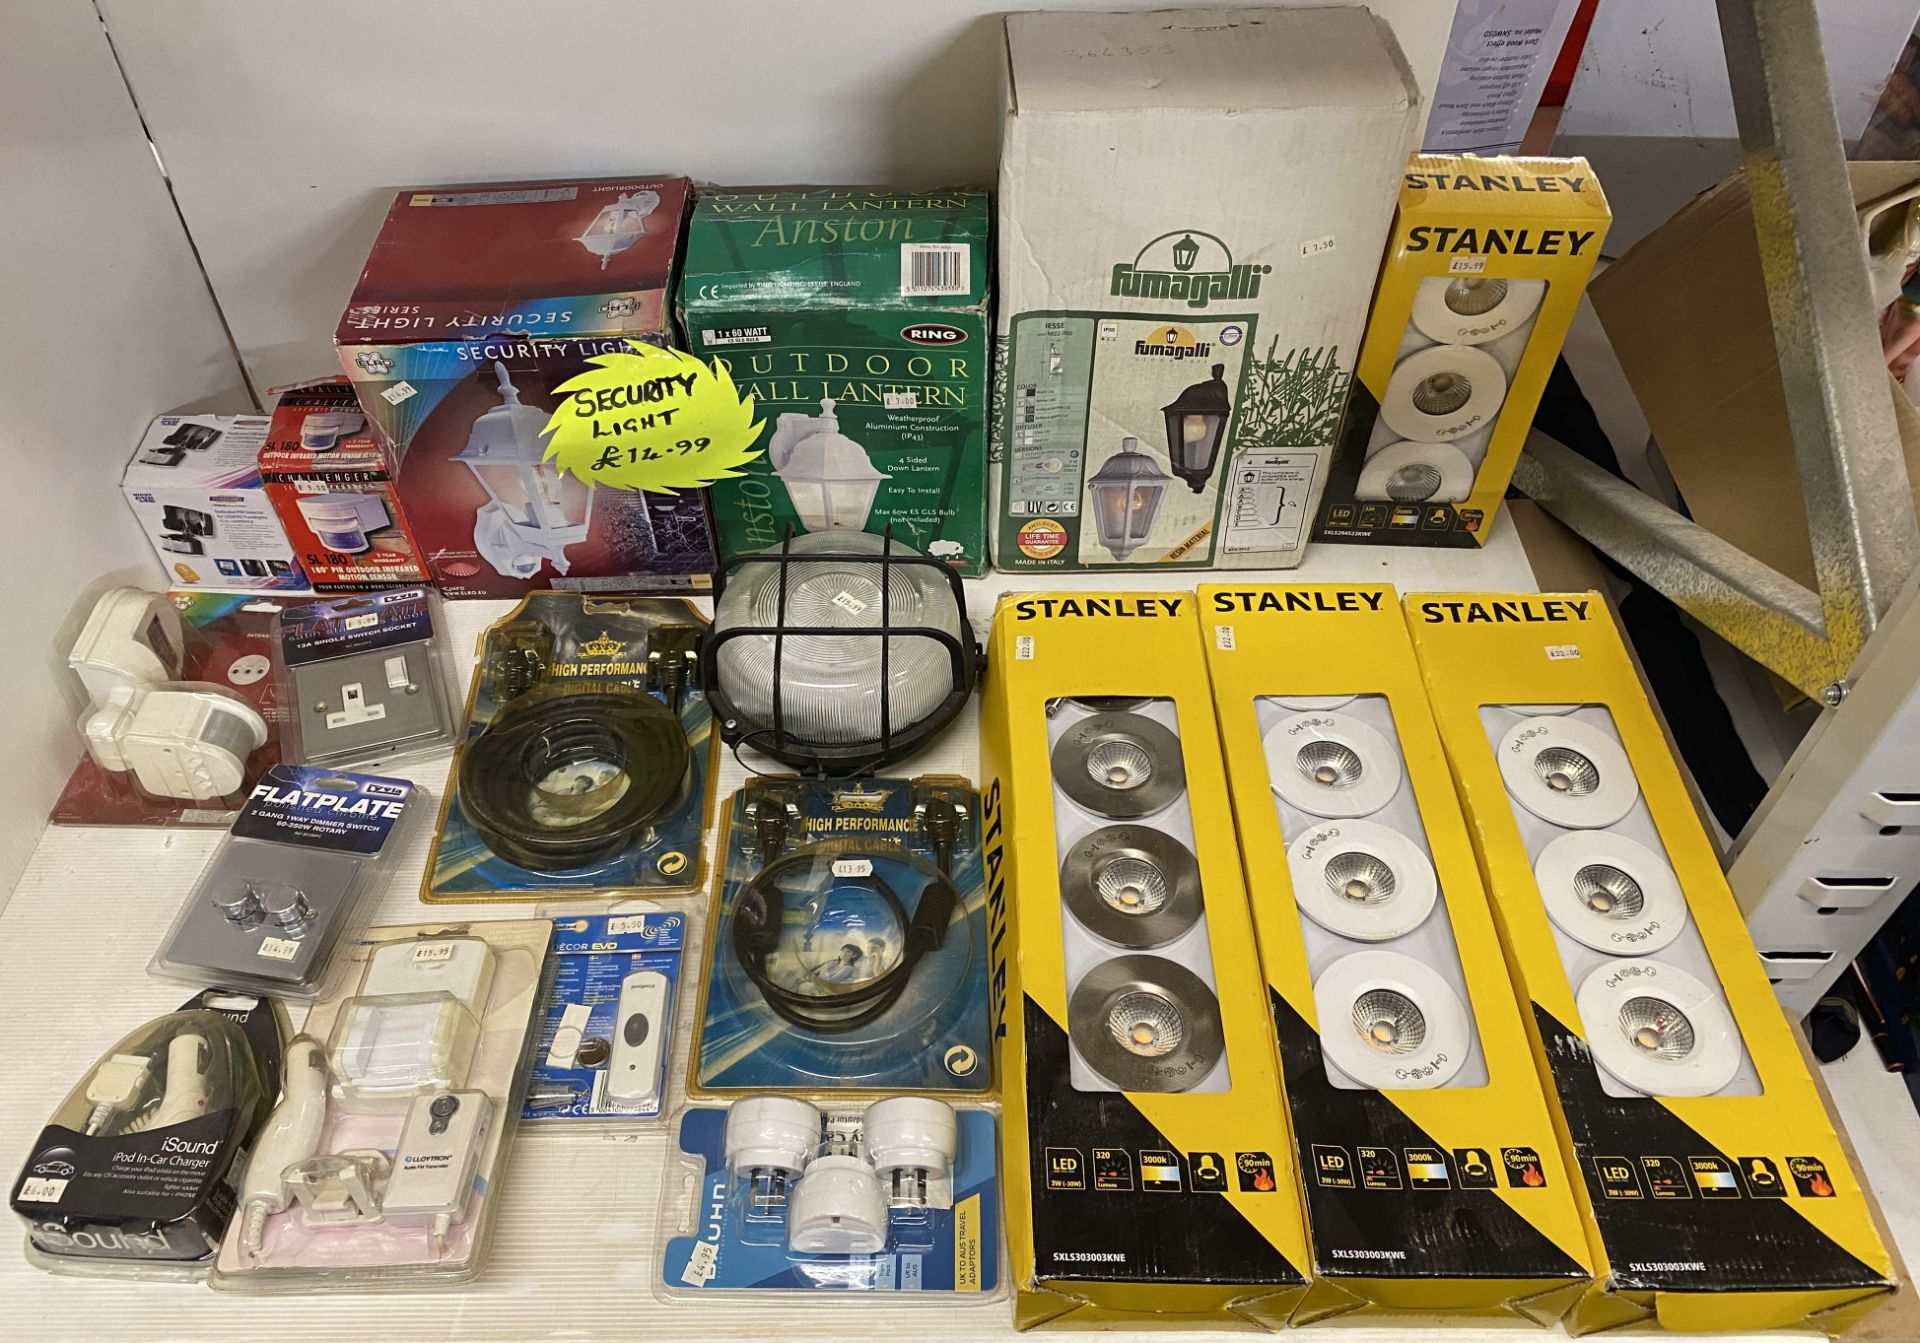 Contents to part shelf - large quantity of electric accessories - lanterns, wall lights,